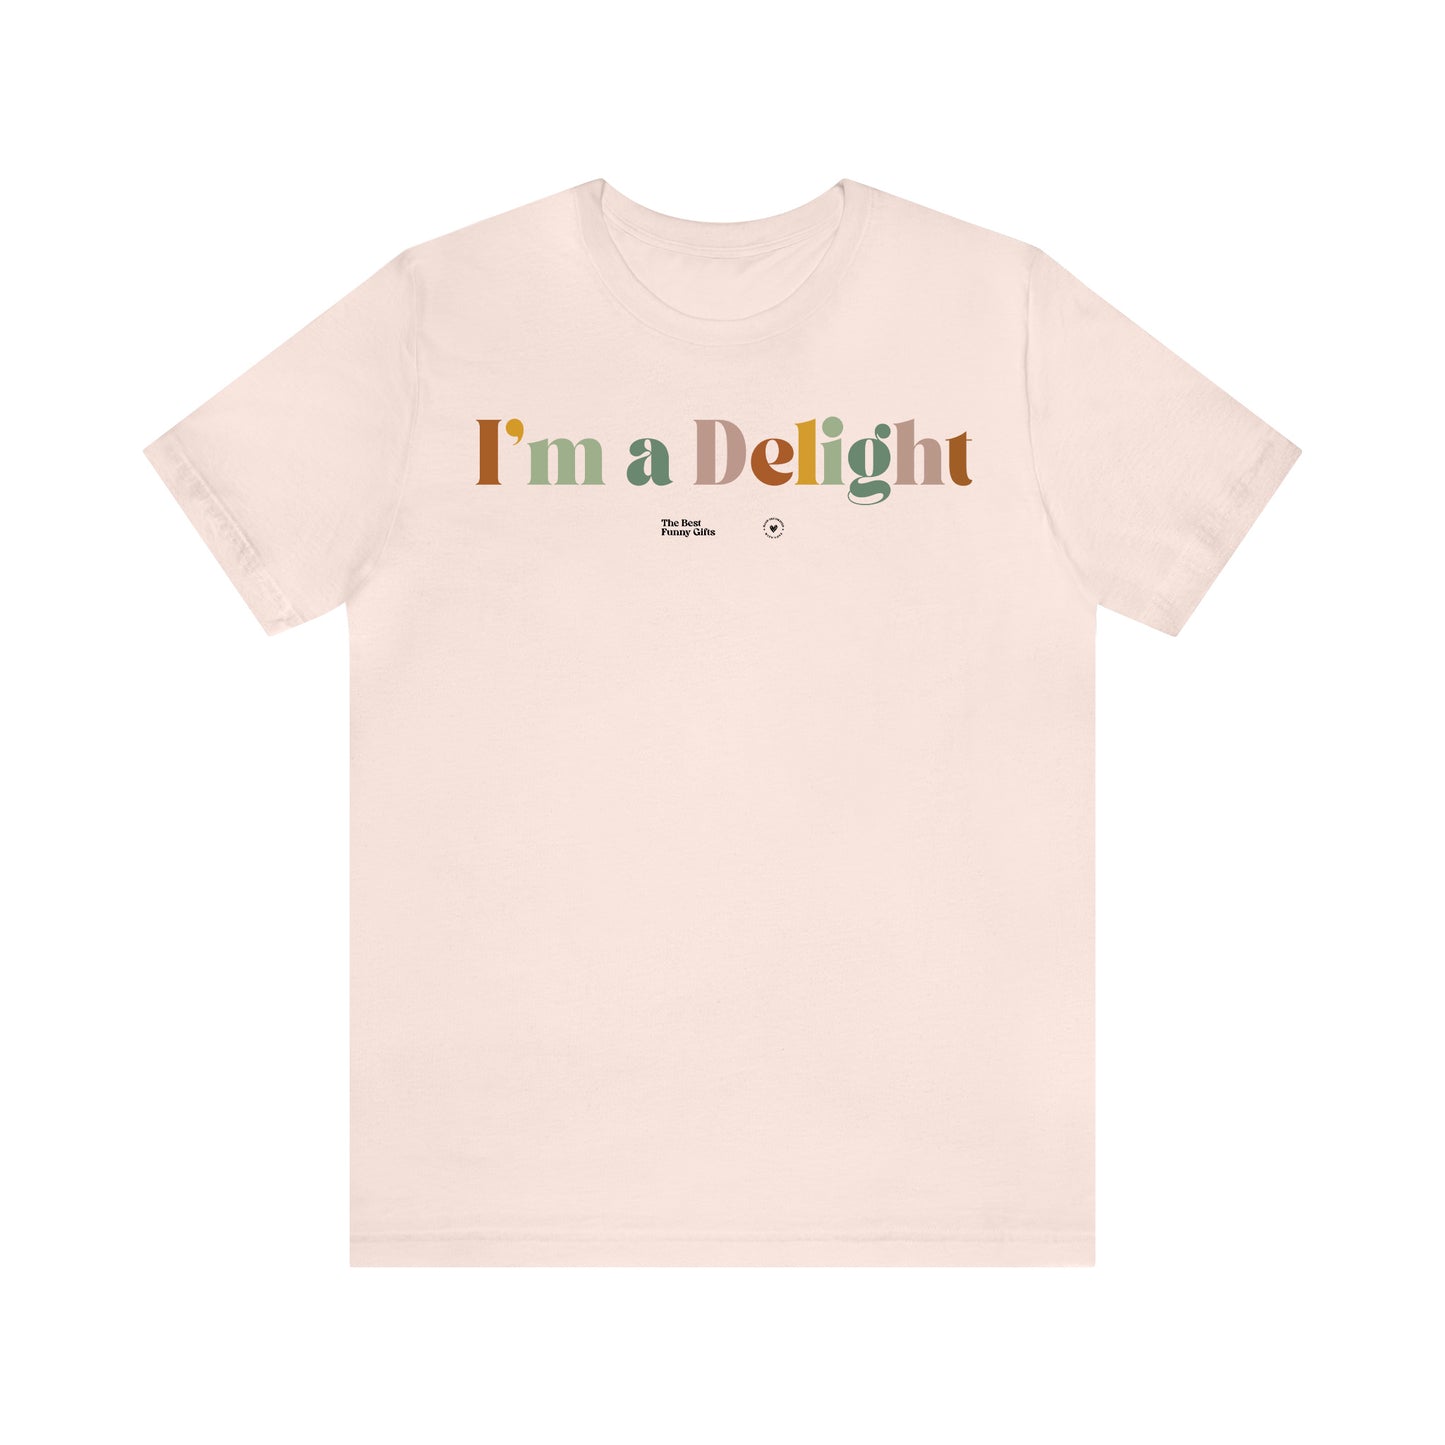 Funny Shirts for Women - I'm a Delight - Women’s T Shirts